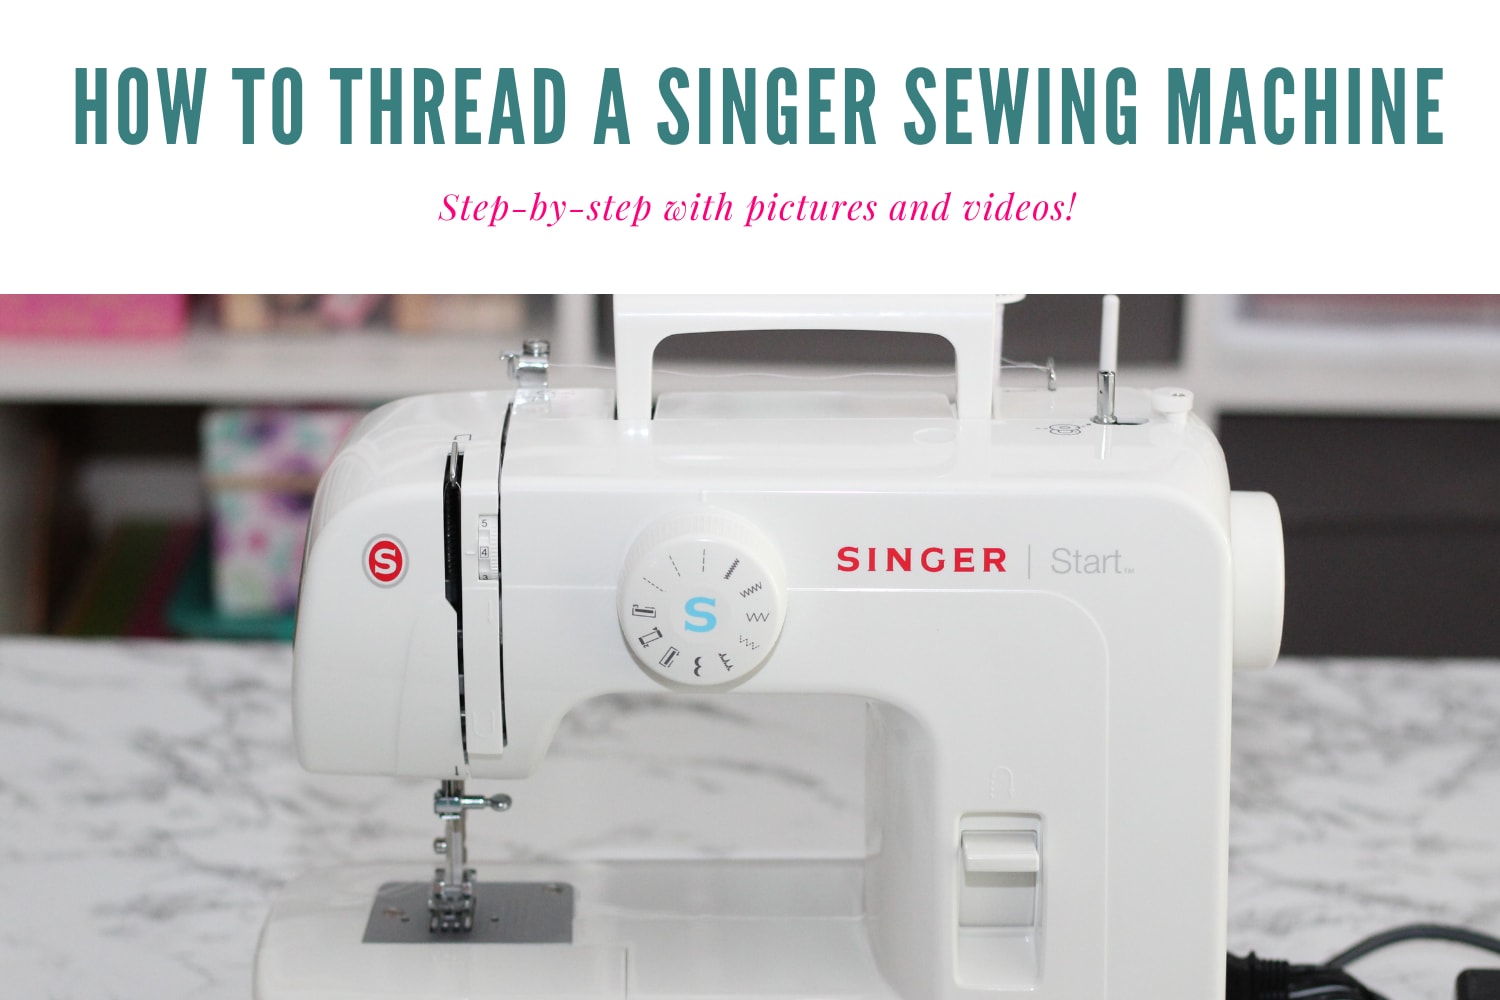 How to correctly orient a sewing machine needle into a sewing machine